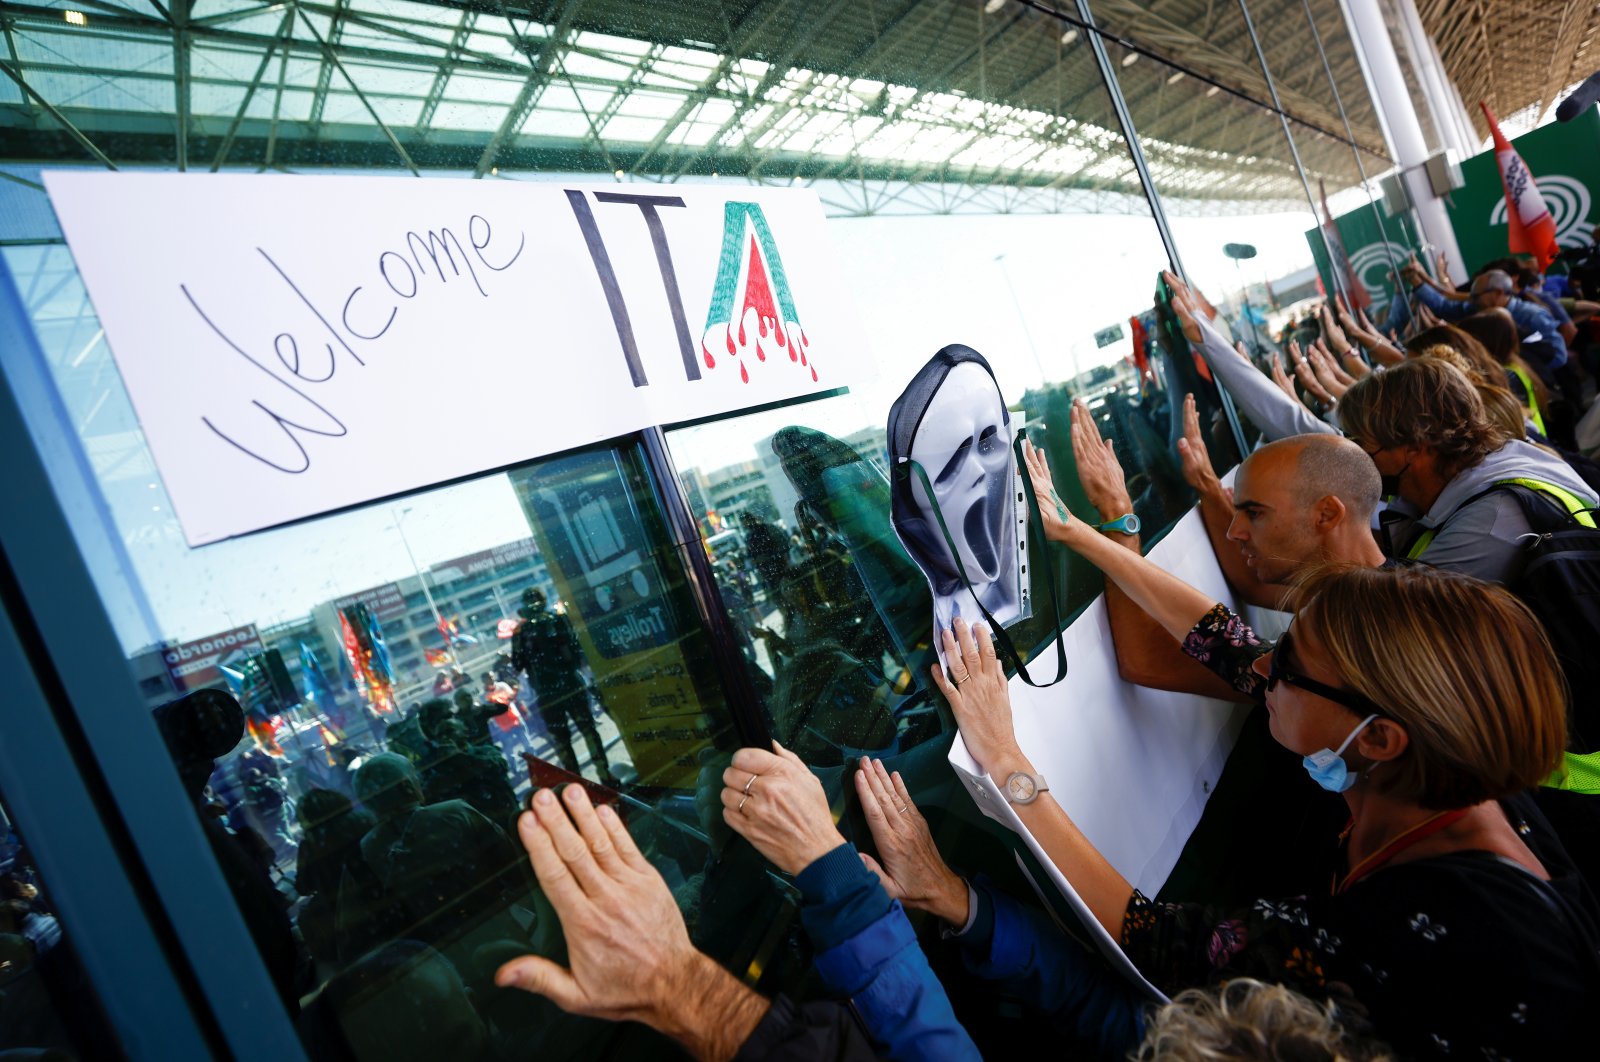 People gather outside Fiumicino airport as Alitalia workers protest against Italia Trasporto Aereo (ITA), as the new airline carrier starts flying in place of bankrupt Alitalia, in Rome, Italy, Oct. 15, 2021. (Reuters Photo)